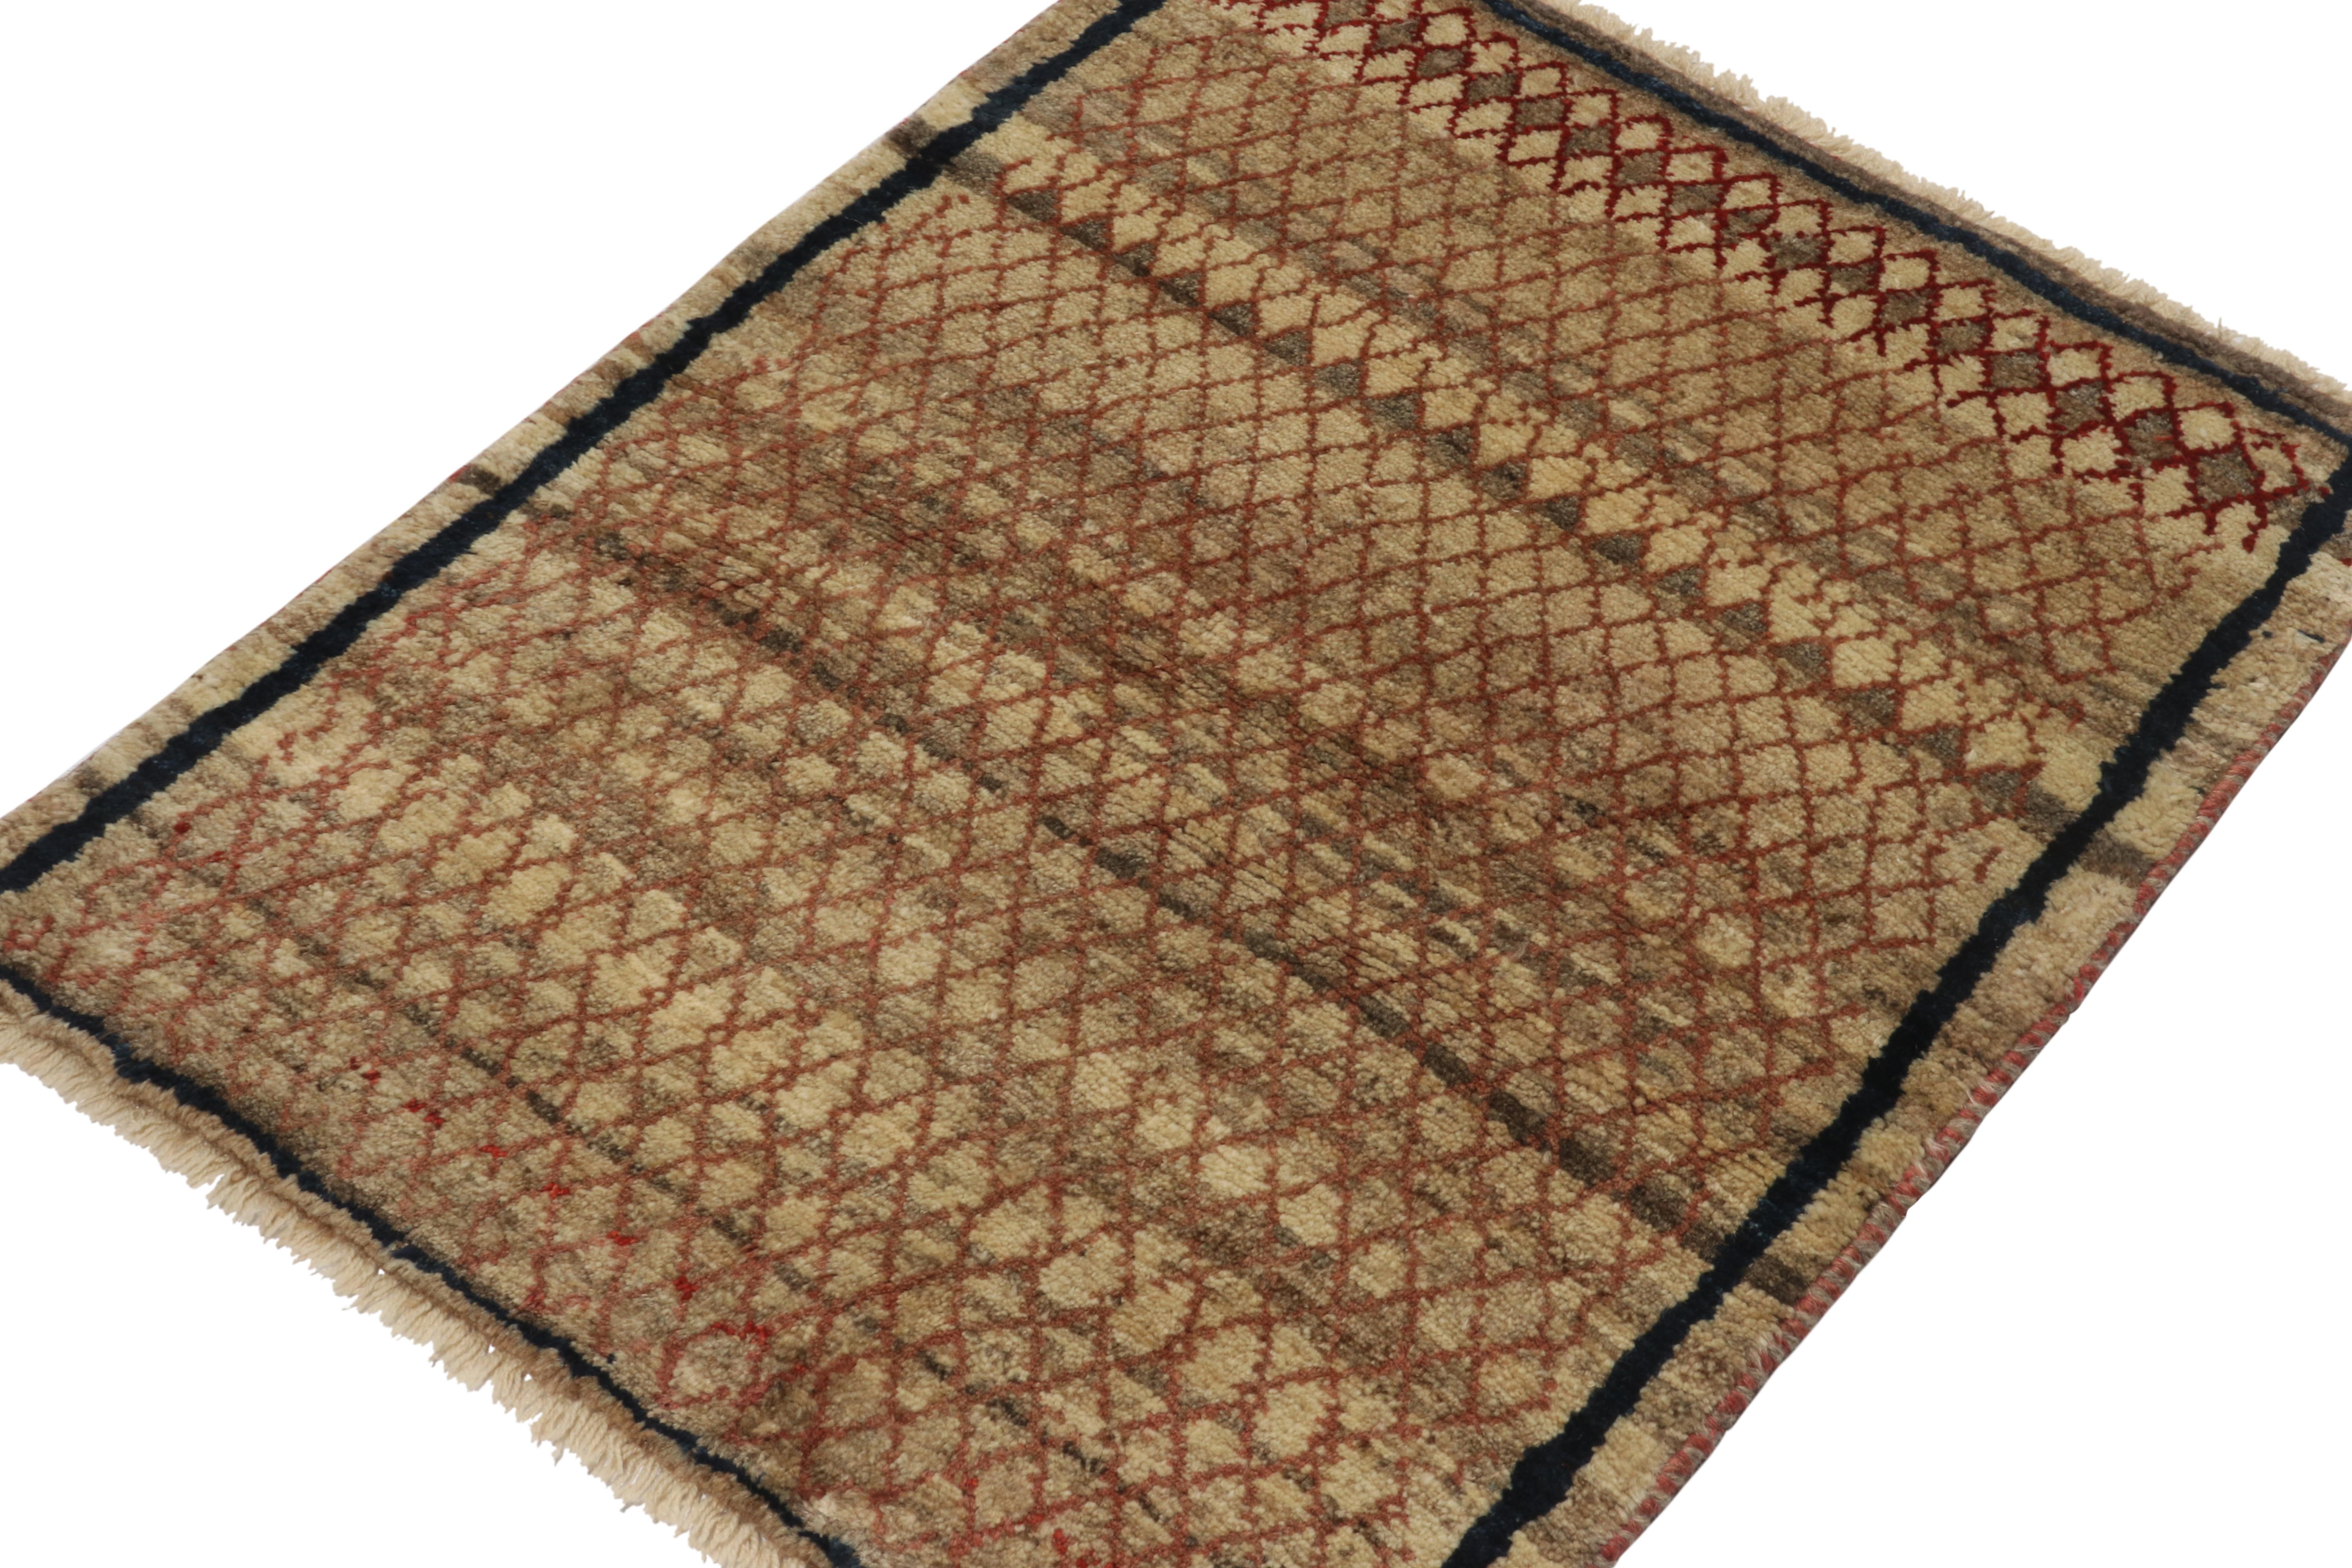 A vintage 2x3 Persian Gabbeh rug in the latest additions to Rug & Kilim’s curation of rare tribal pieces. Hand-knotted in wool circa 1950-1960.

On the Design: 

This mid-century piece features an elaborate trellis pattern with rust red notes